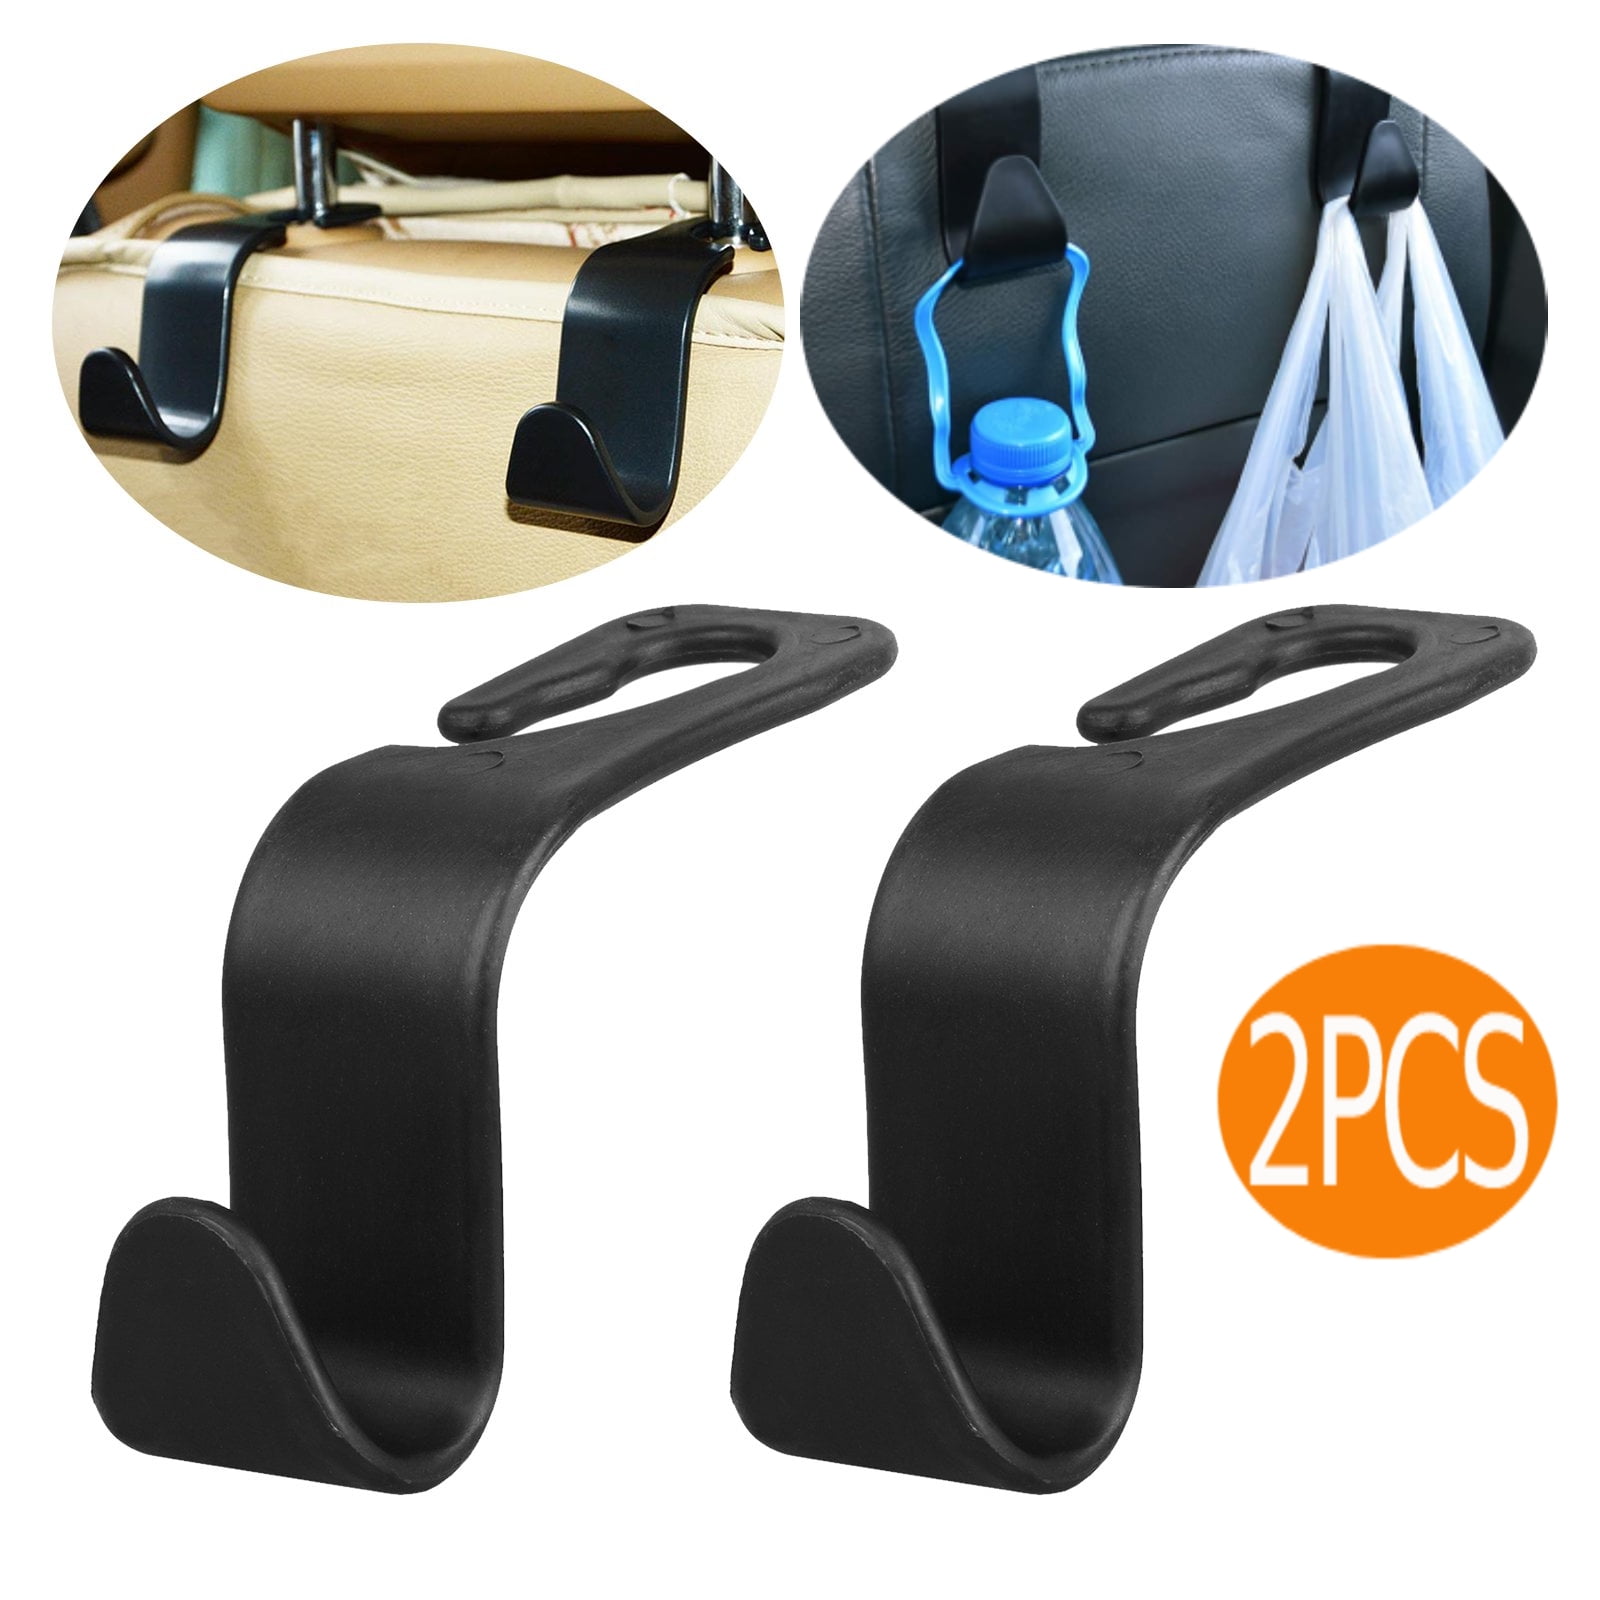 4 Magic Headrest Hooks for Car-Universal Auto Vehicle Hanger Holder Back Front Seat Storage Organizer for Hanging Purse,Handbag,Backpack,Grocery Bags,Women Accessories 